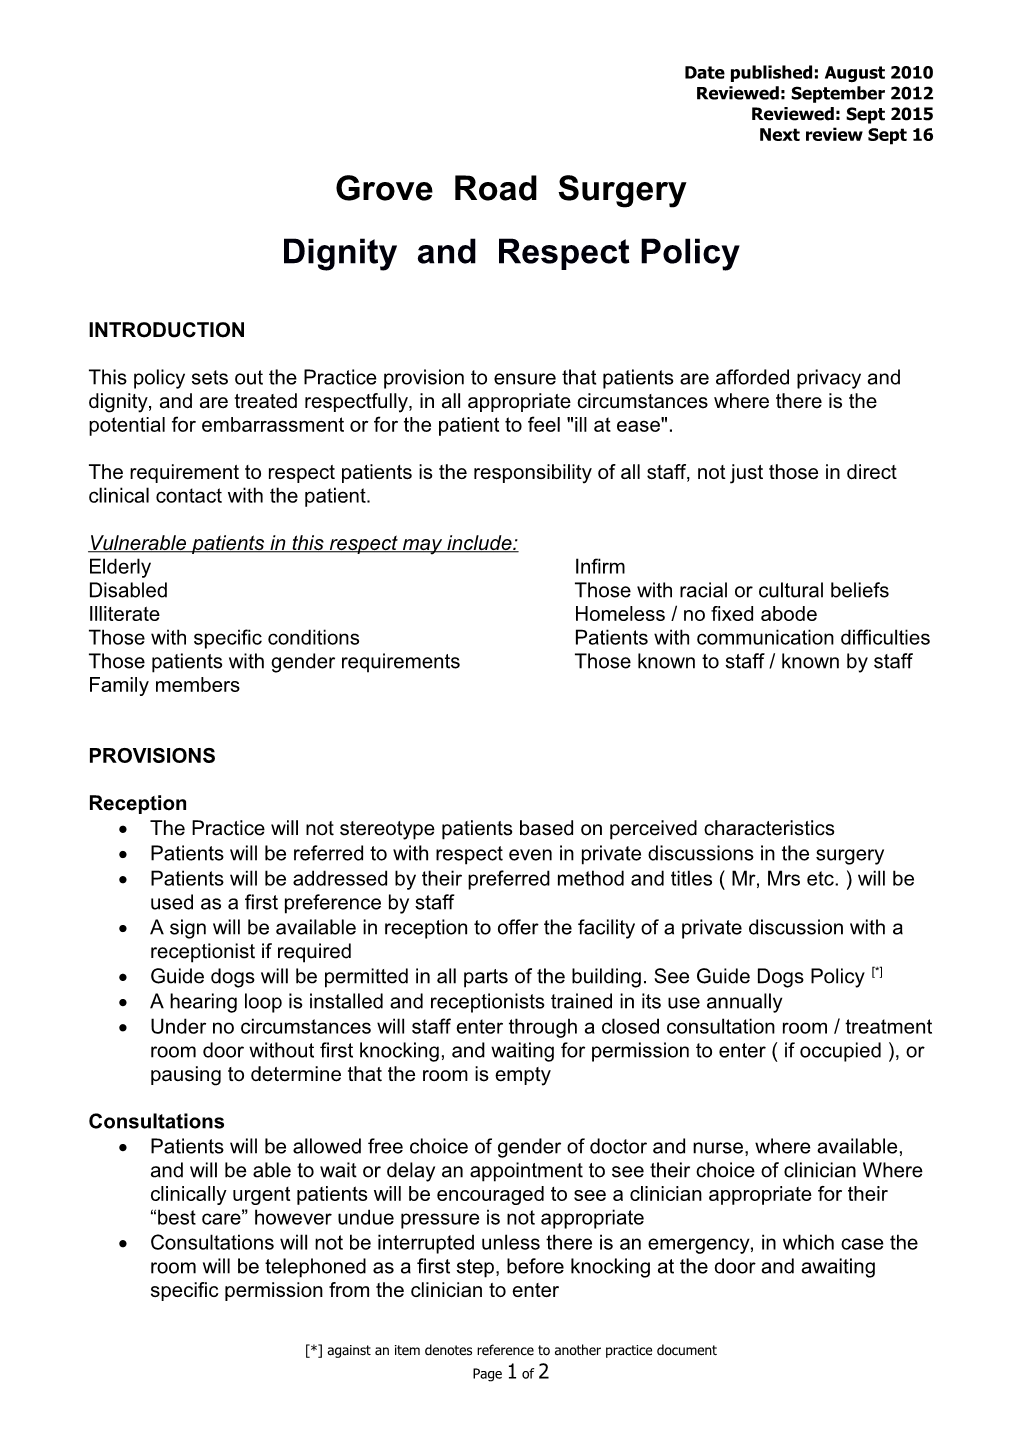 Dignity and Respect Policy